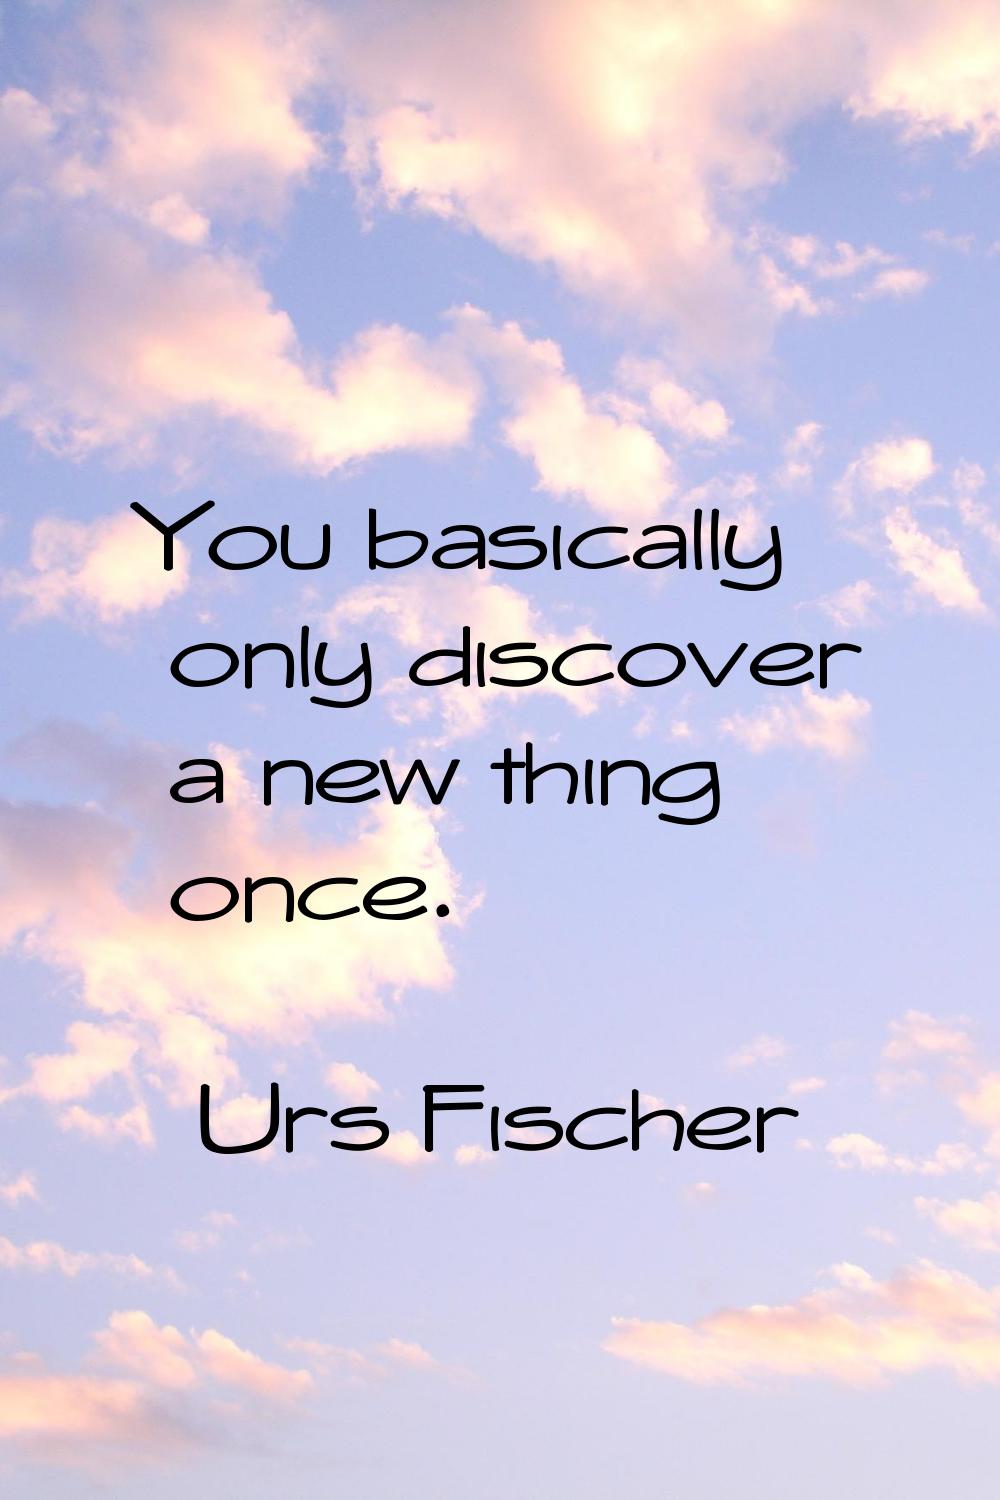 You basically only discover a new thing once.